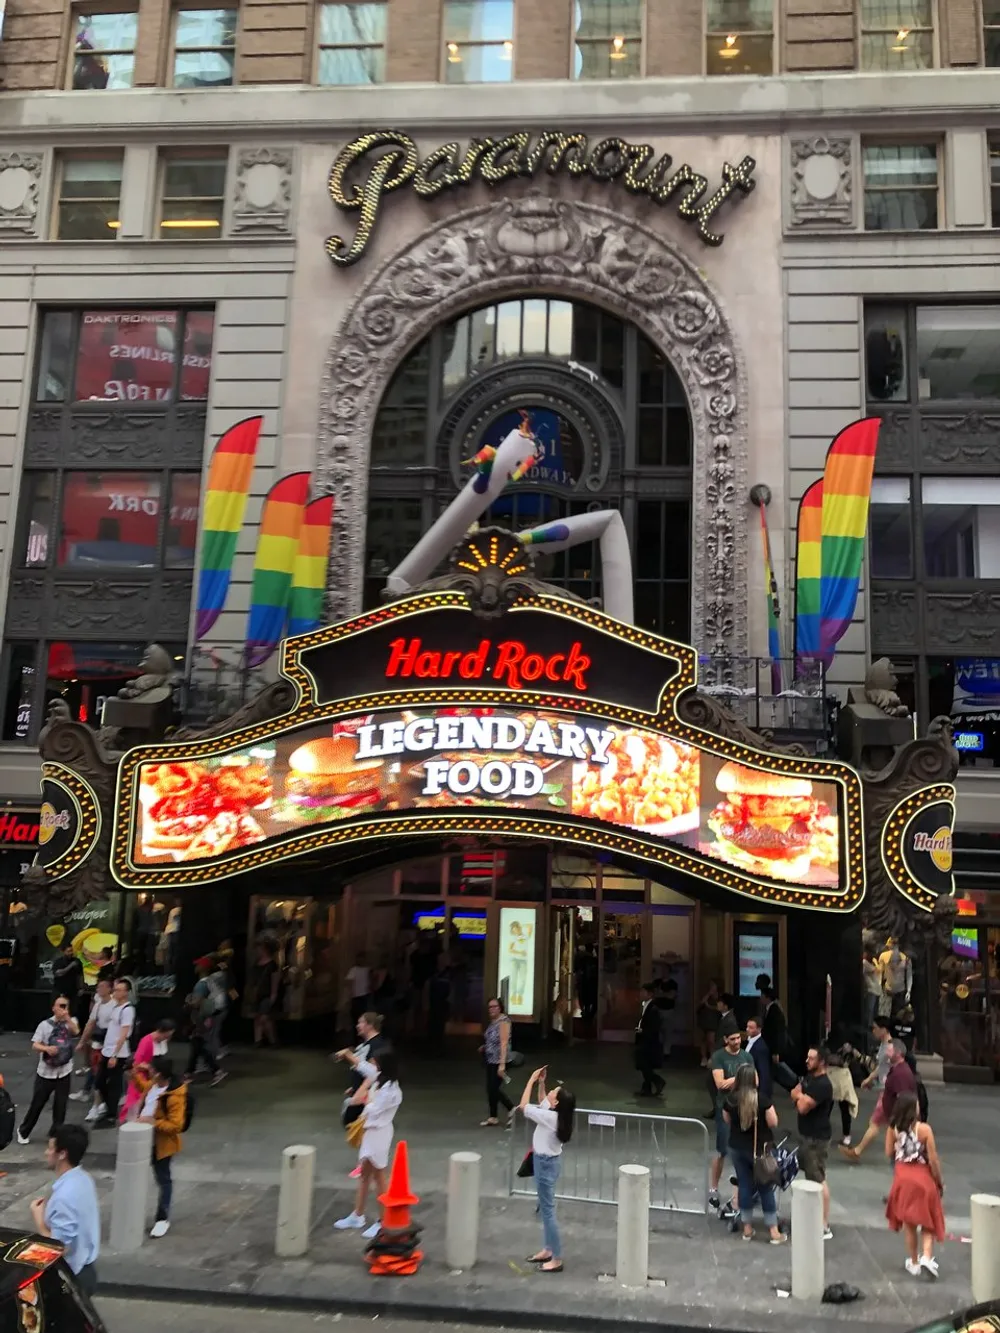 The image shows a busy street scene in front of the Hard Rock Cafe adorned with rainbow pride flags under a vintage-looking Paramount sign